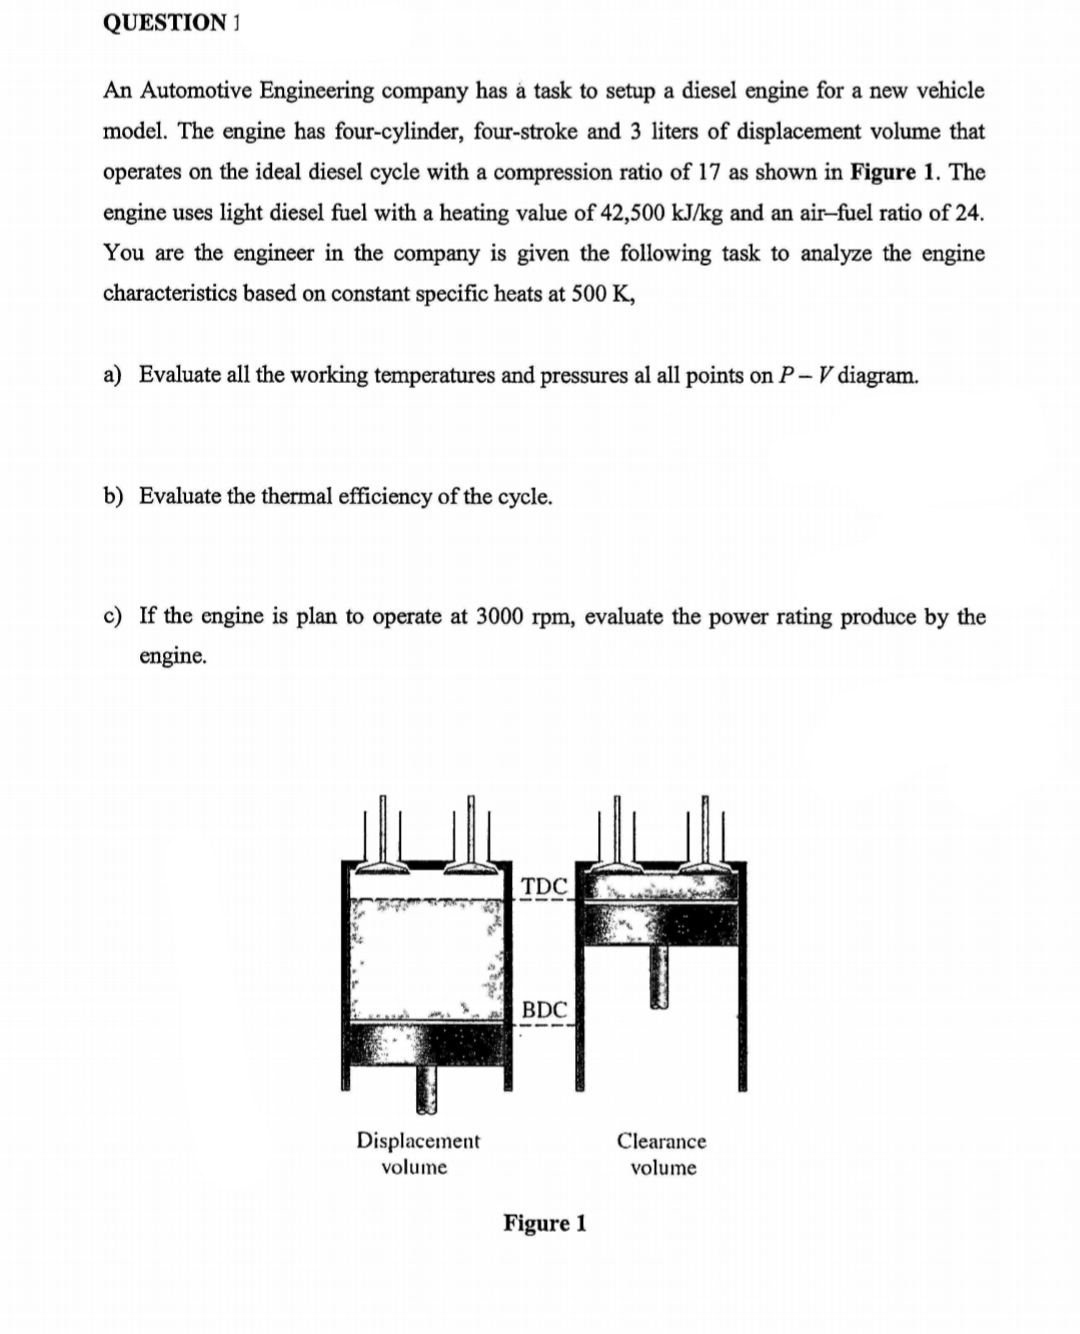 QUESTION 1
An Automotive Engineering company has à task to setup a diesel engine for a new vehicle
model. The engine has four-cylinder, four-stroke and 3 liters of displacement volume that
operates on the ideal diesel cycle with a compression ratio of 17 as shown in Figure 1. The
engine uses light diesel fuel with a heating value of 42,500 kJ/kg and an air-fuel ratio of 24.
You are the engineer in the company is given the following task to analyze the engine
characteristics based on constant specific heats at 500 K,
a) Evaluate all the working temperatures and pressures al all points on P – V diagram.
b) Evaluate the thermal efficiency of the cycle.
c) If the engine is plan to operate at 3000 rpm, evaluate the power rating produce by the
engine.
TDC
BDC
Displacement
Clearance
volume
volume
Figure 1
